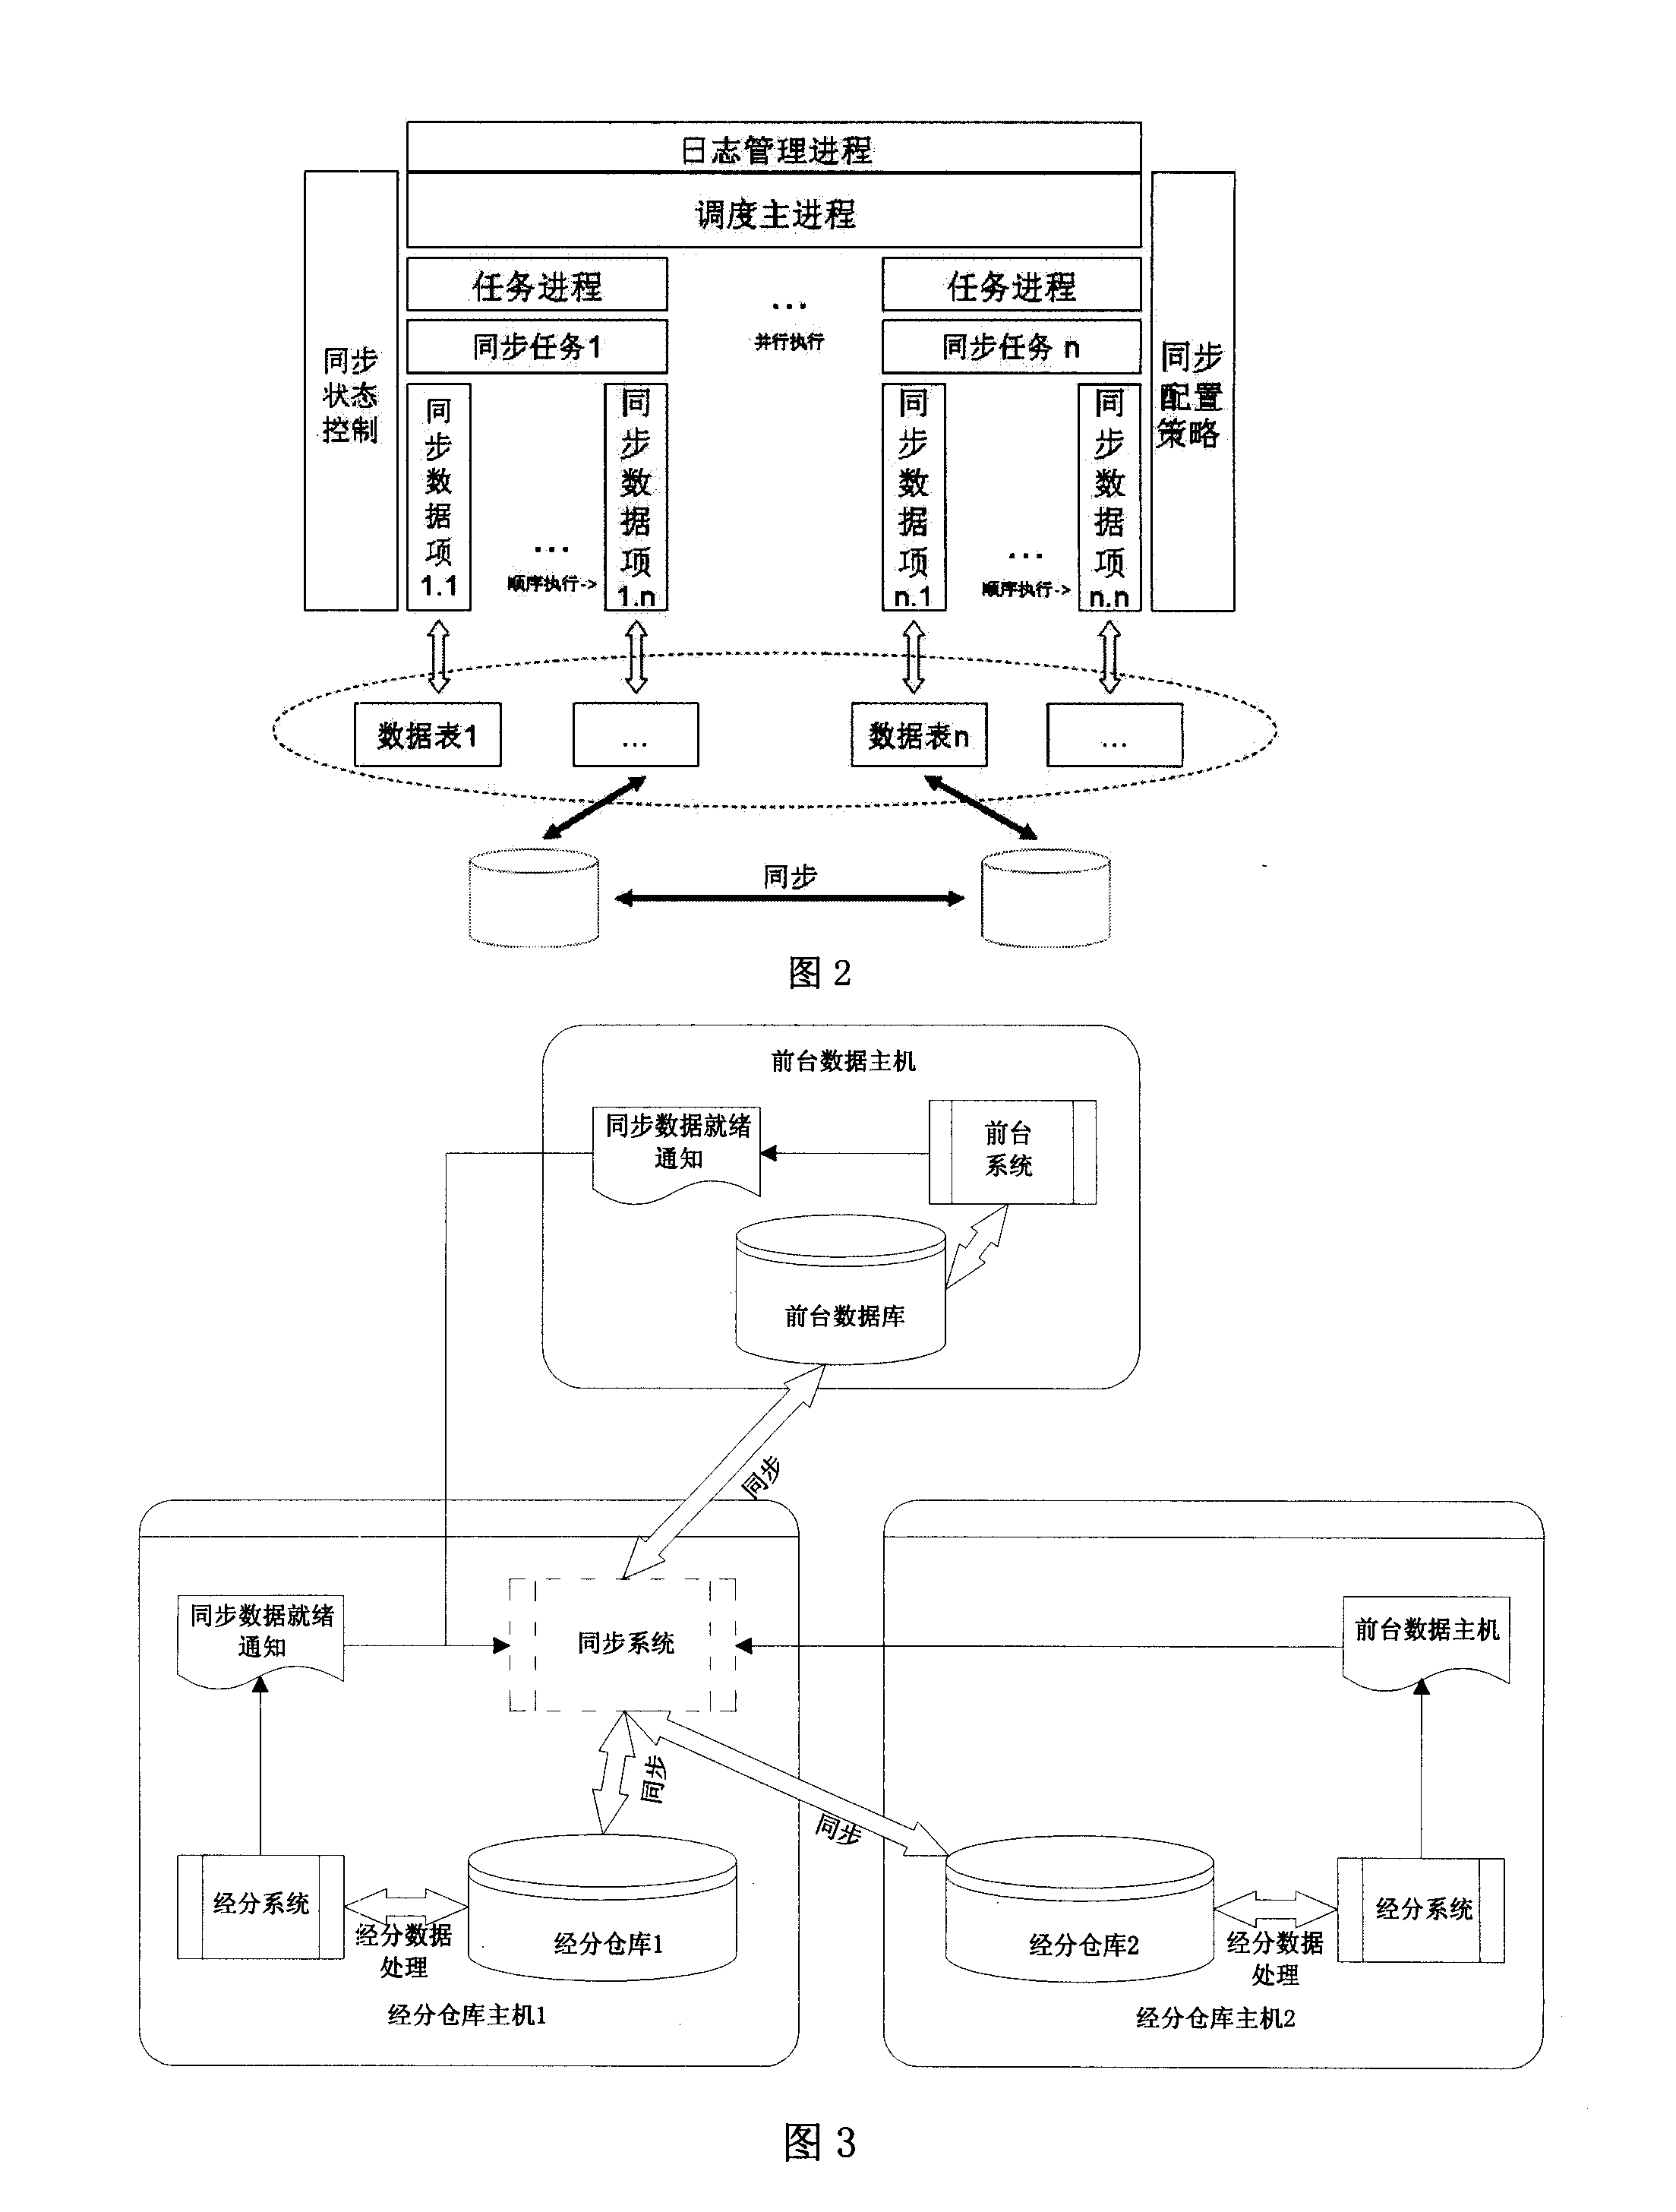 Data synchronization method for double-nucleus library